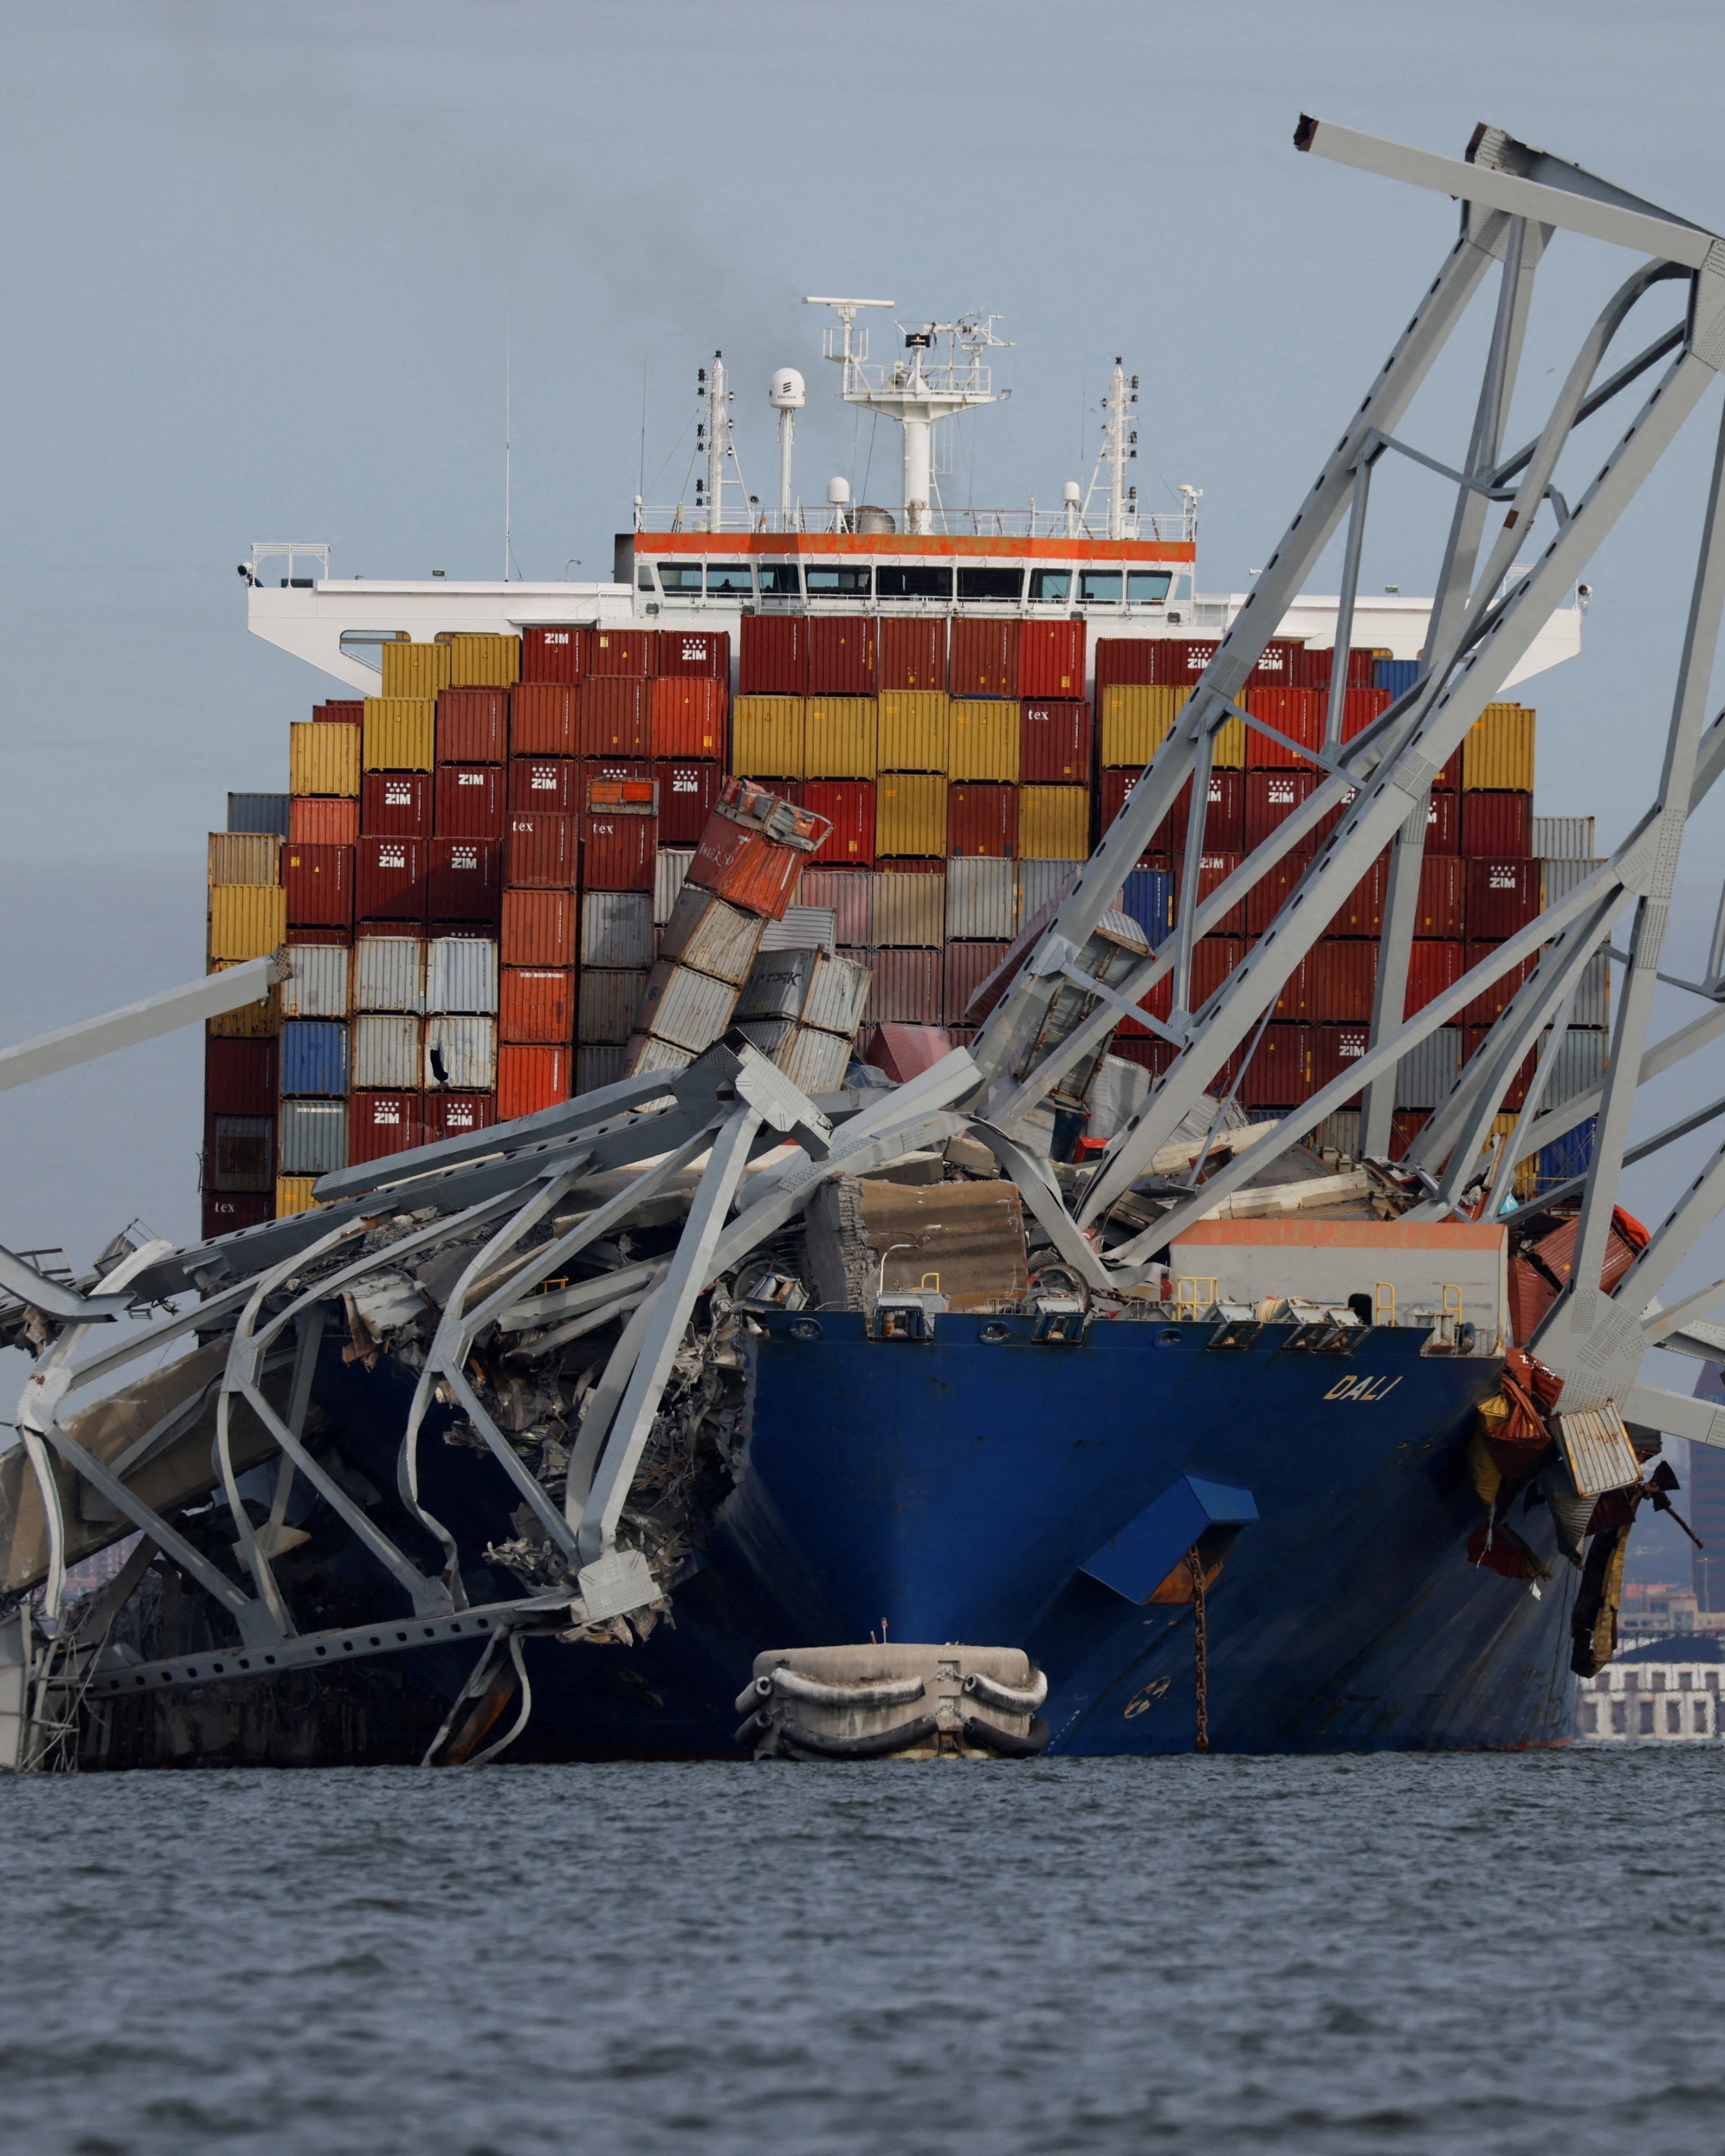 The Dali cargo vessel after crashing into the Francis Scott Key Bridge. Analysts put the cost at up to $3 billion